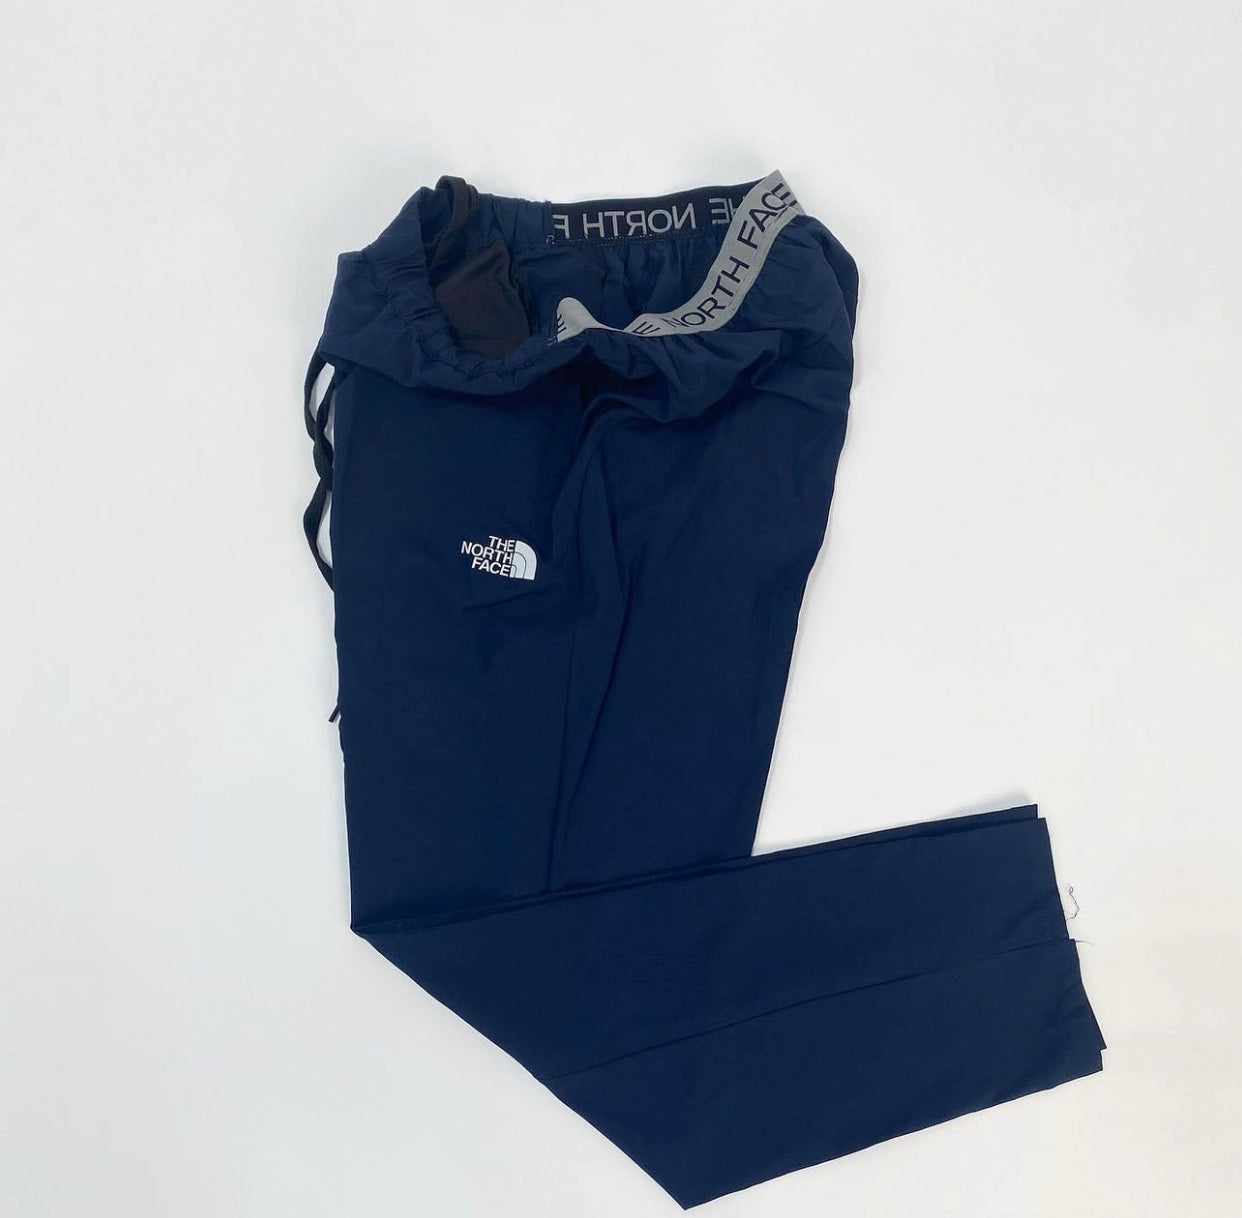 The north face track pant in navy